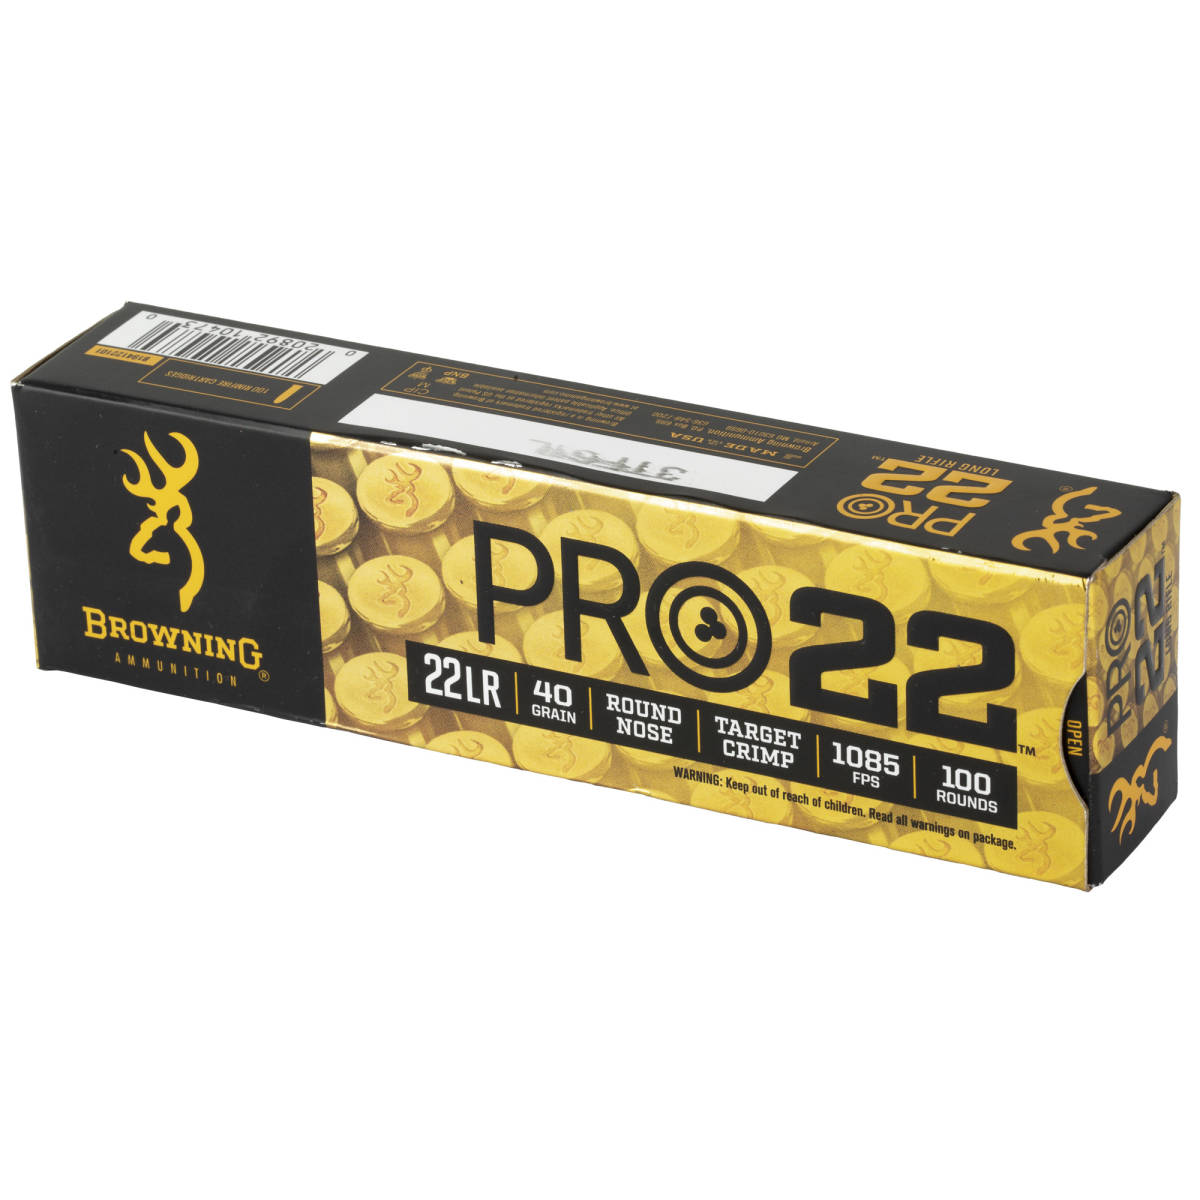 Browning Ammo B194122101 Pro22 22 LR 40 gr Lead Round Nose 100 Per Box/...-img-2